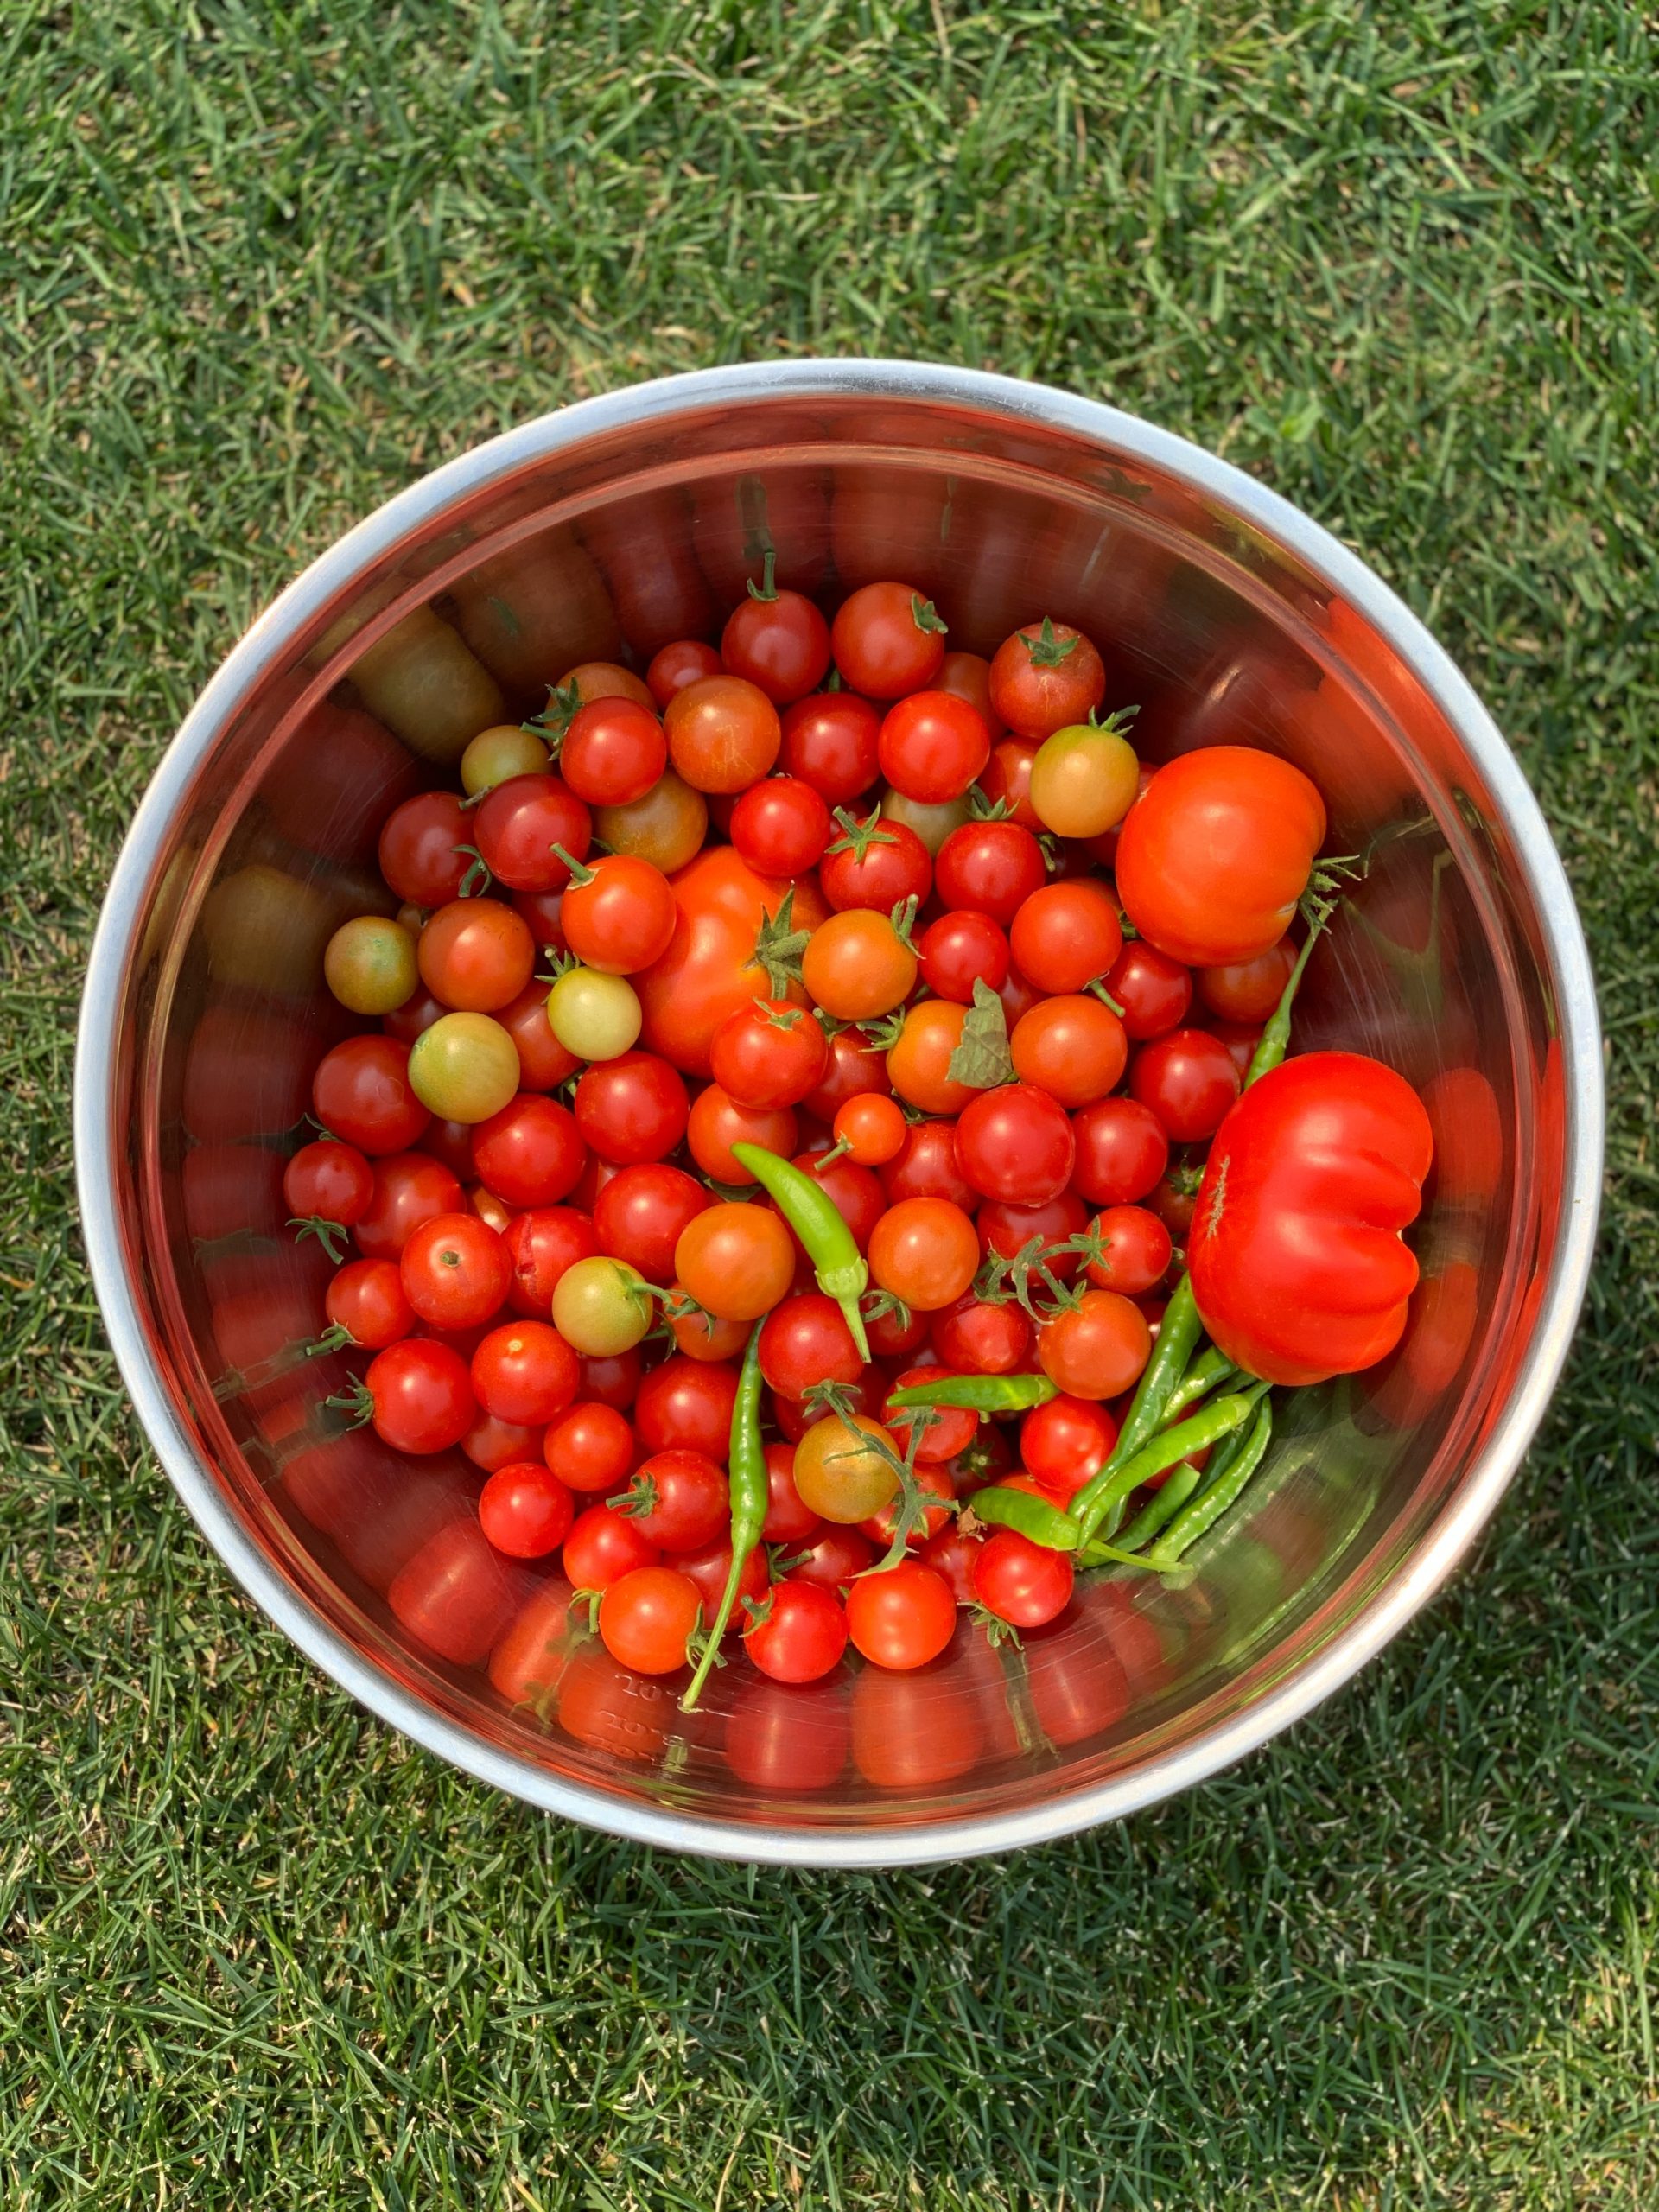 A bowl containing a variety of different sized homegrown tomatoes.